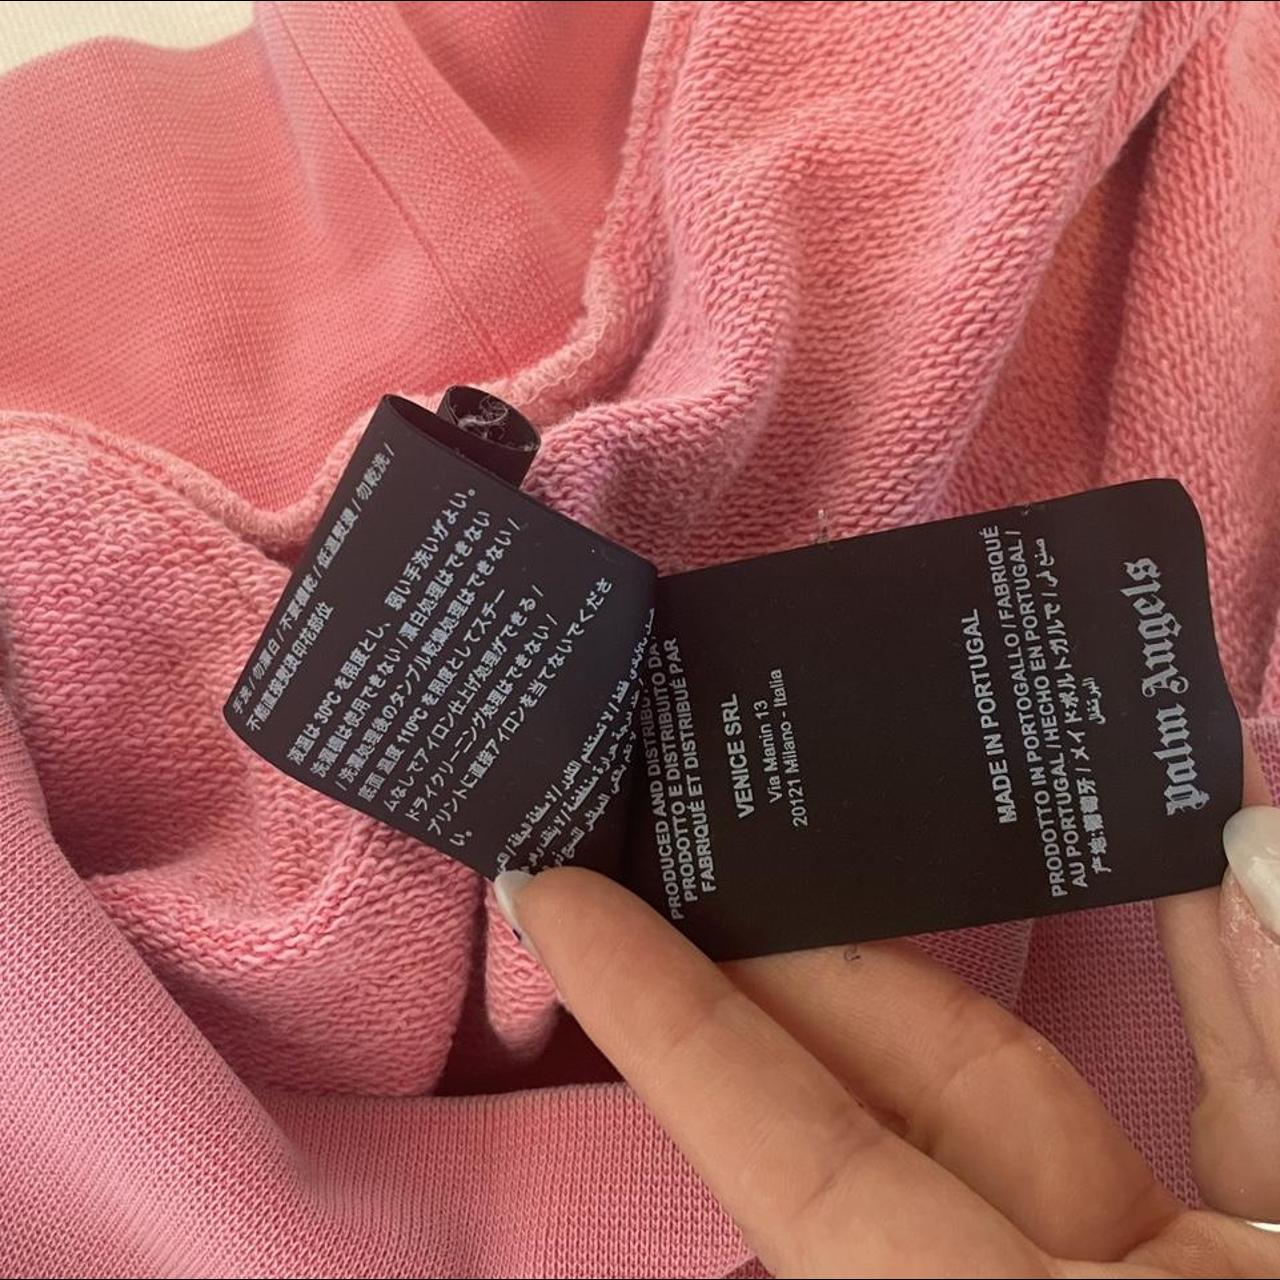 Product Image 3 - Palm angels pink oversized hoodie
Runs